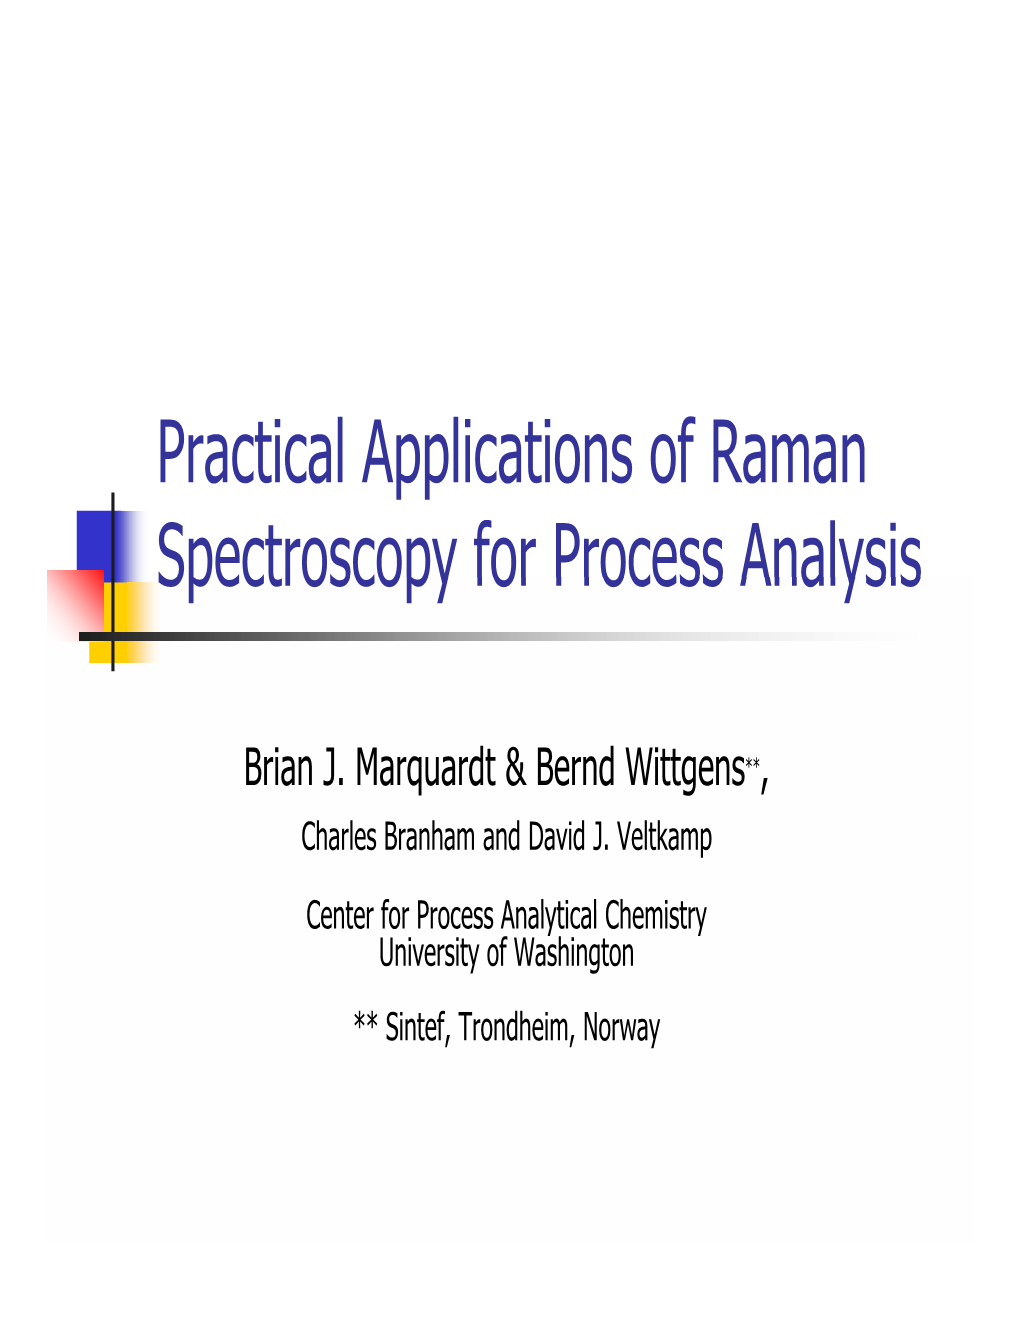 Practical Applications of Raman Spectroscopy for Process Analysis